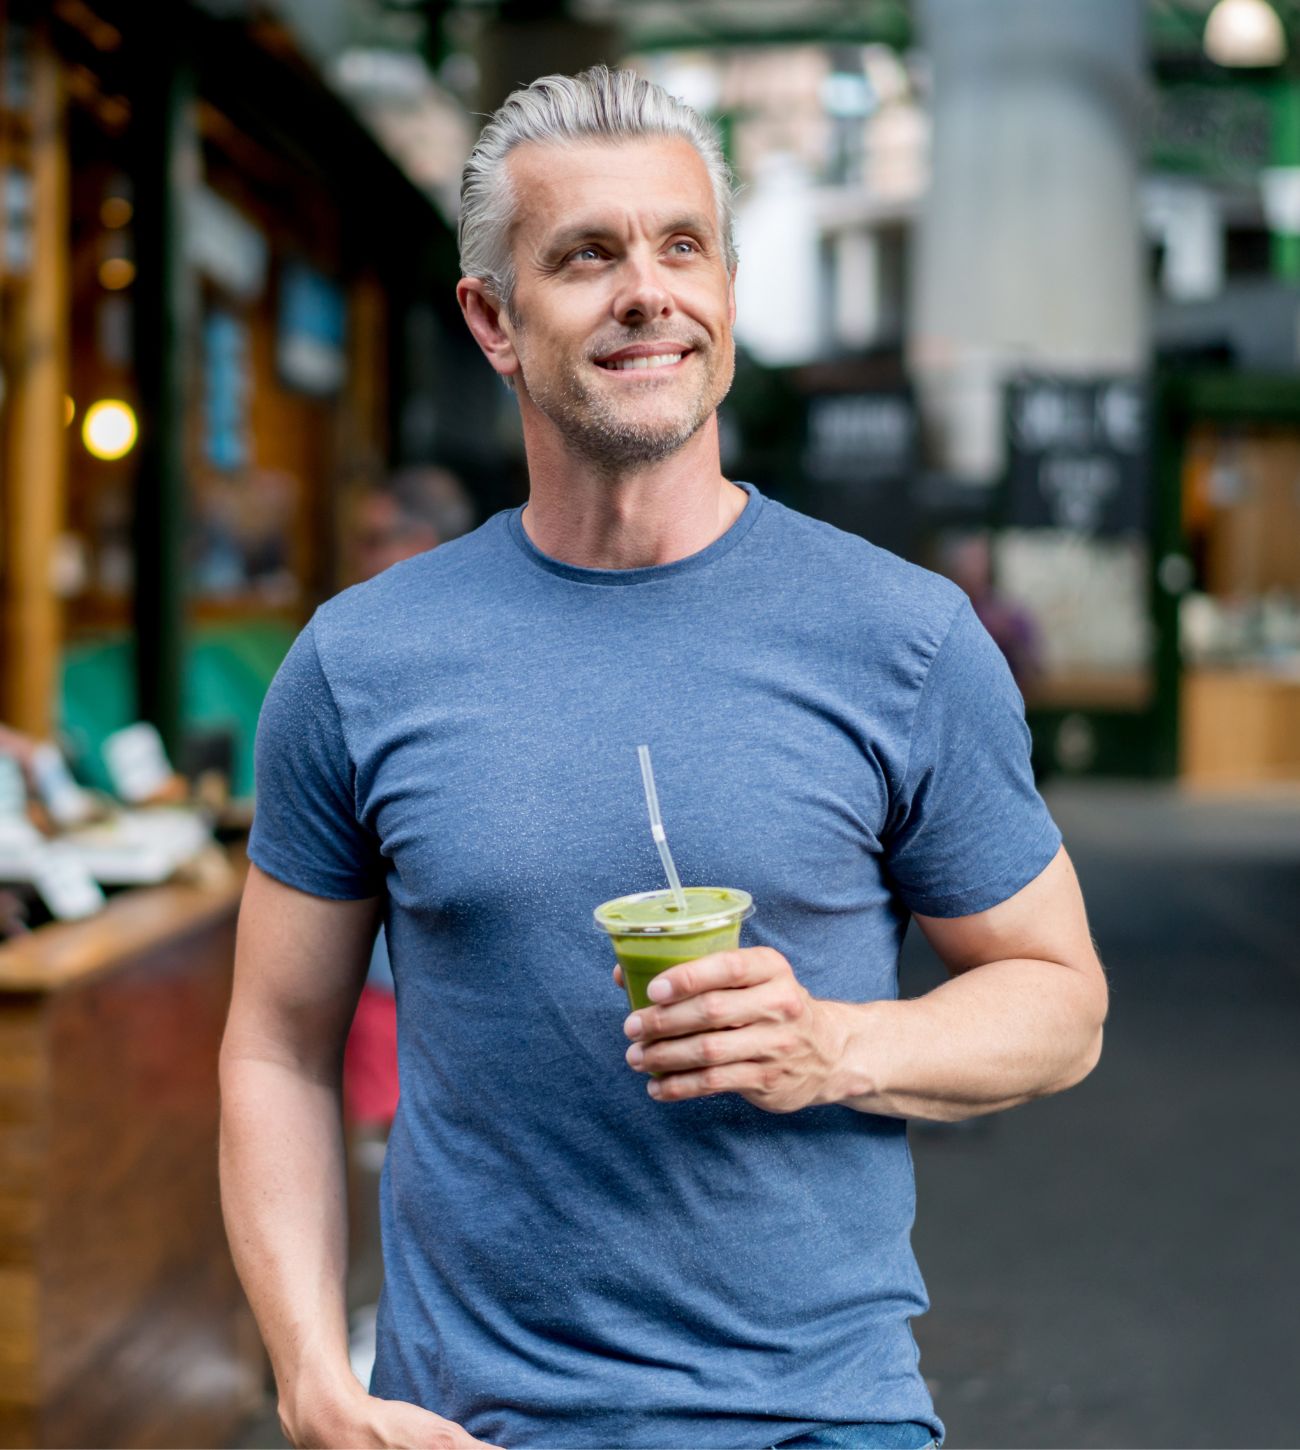 Photo of a man enjoying a green smoothie from a store.